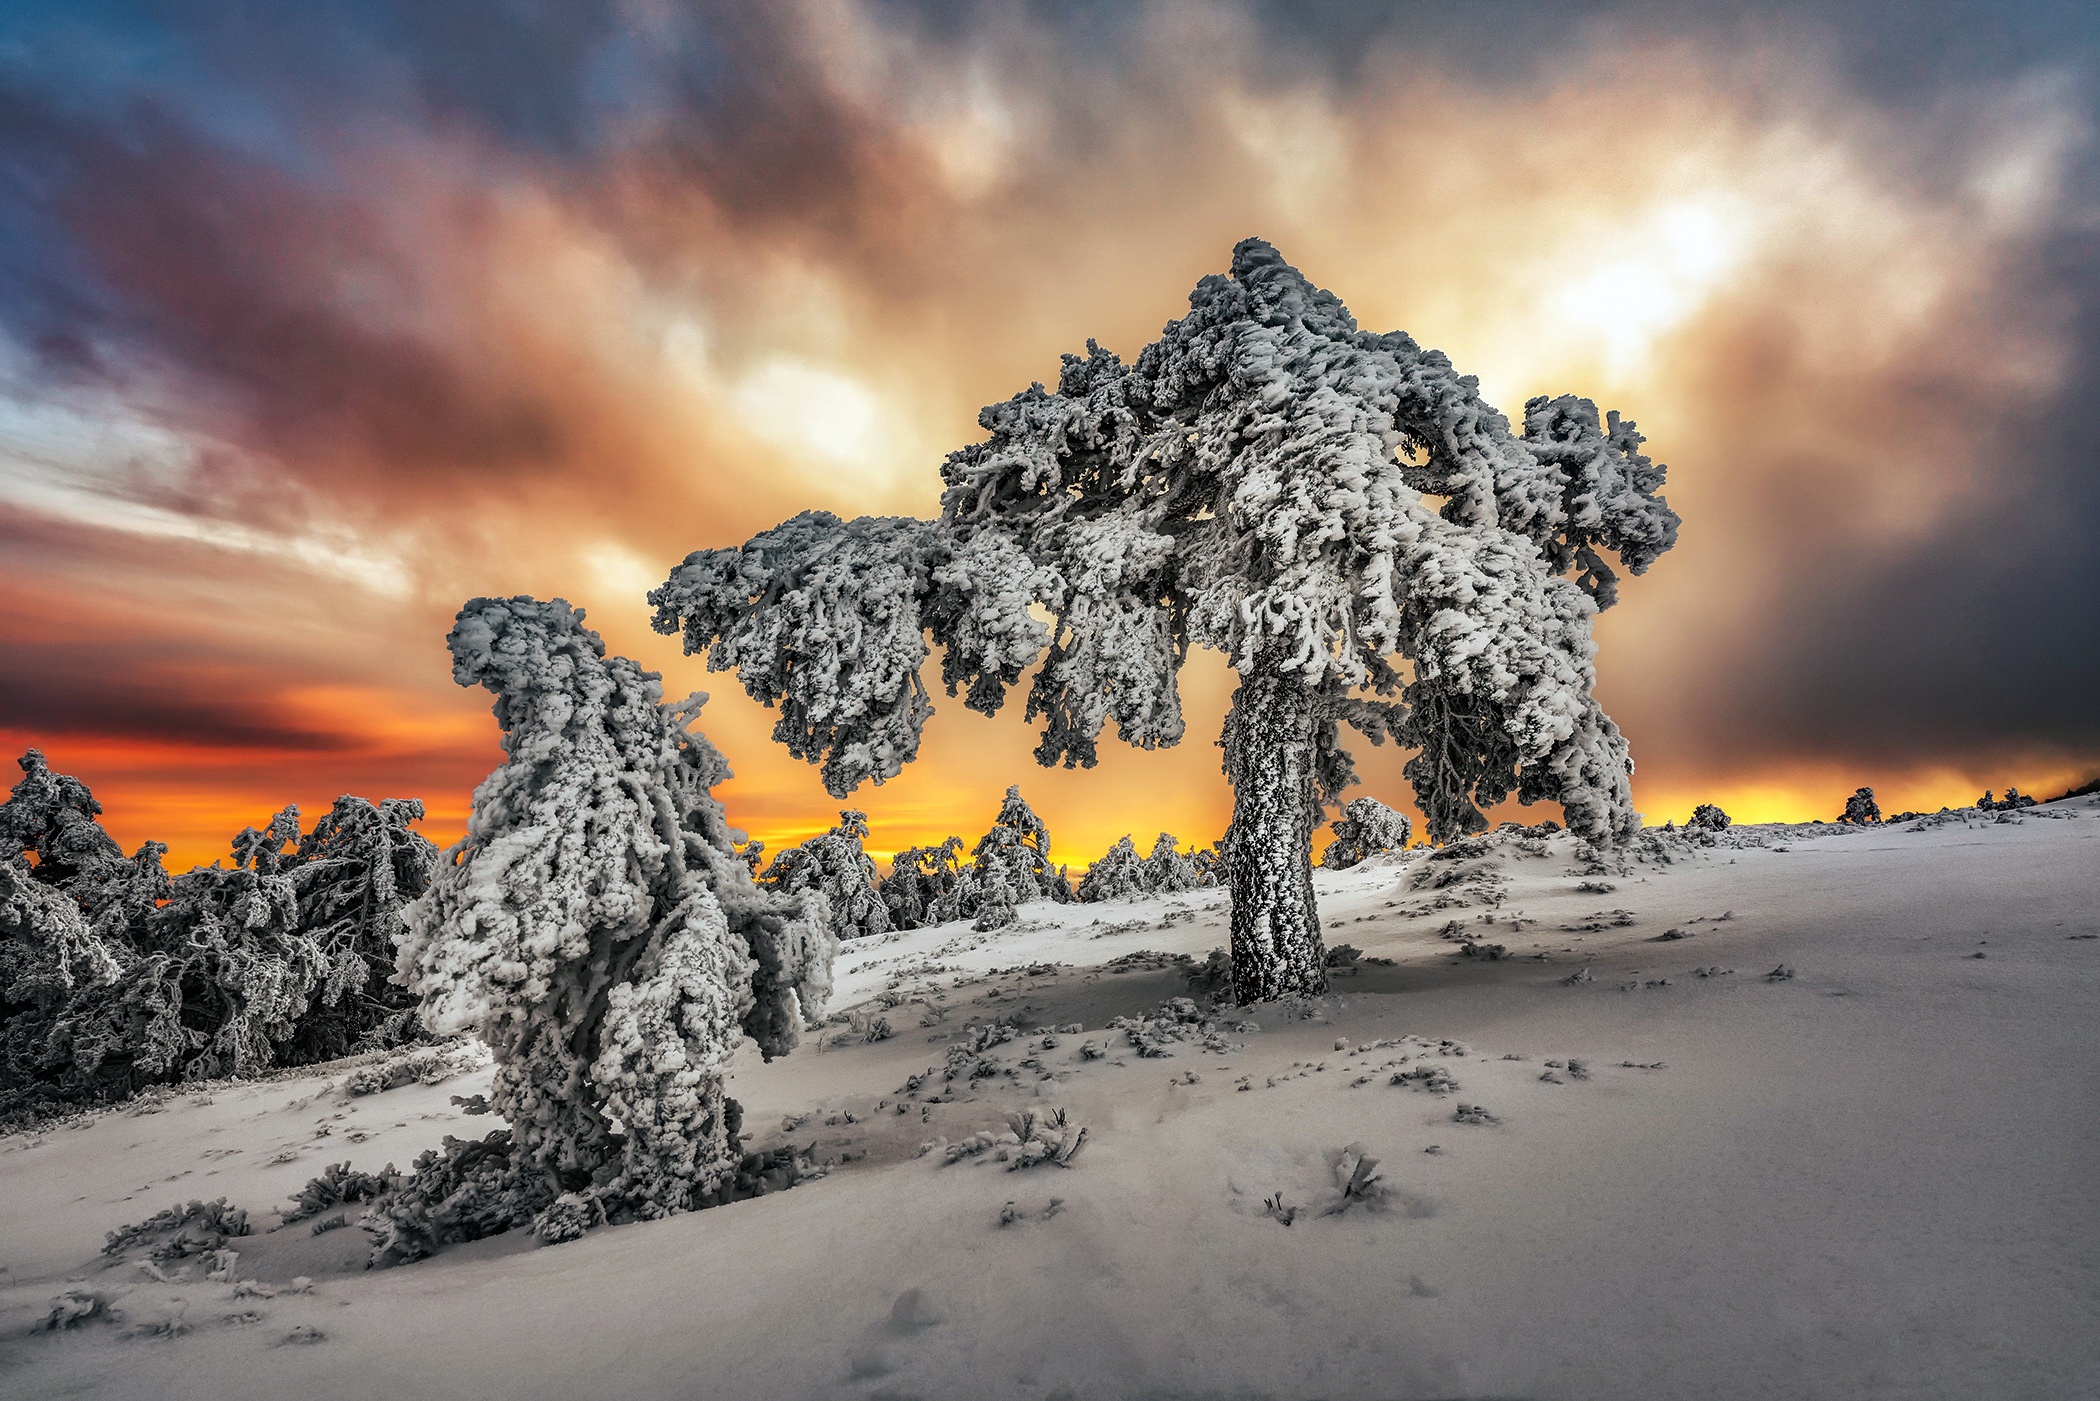 General 2100x1401 cold ice winter snow sky sunlight trees outdoors